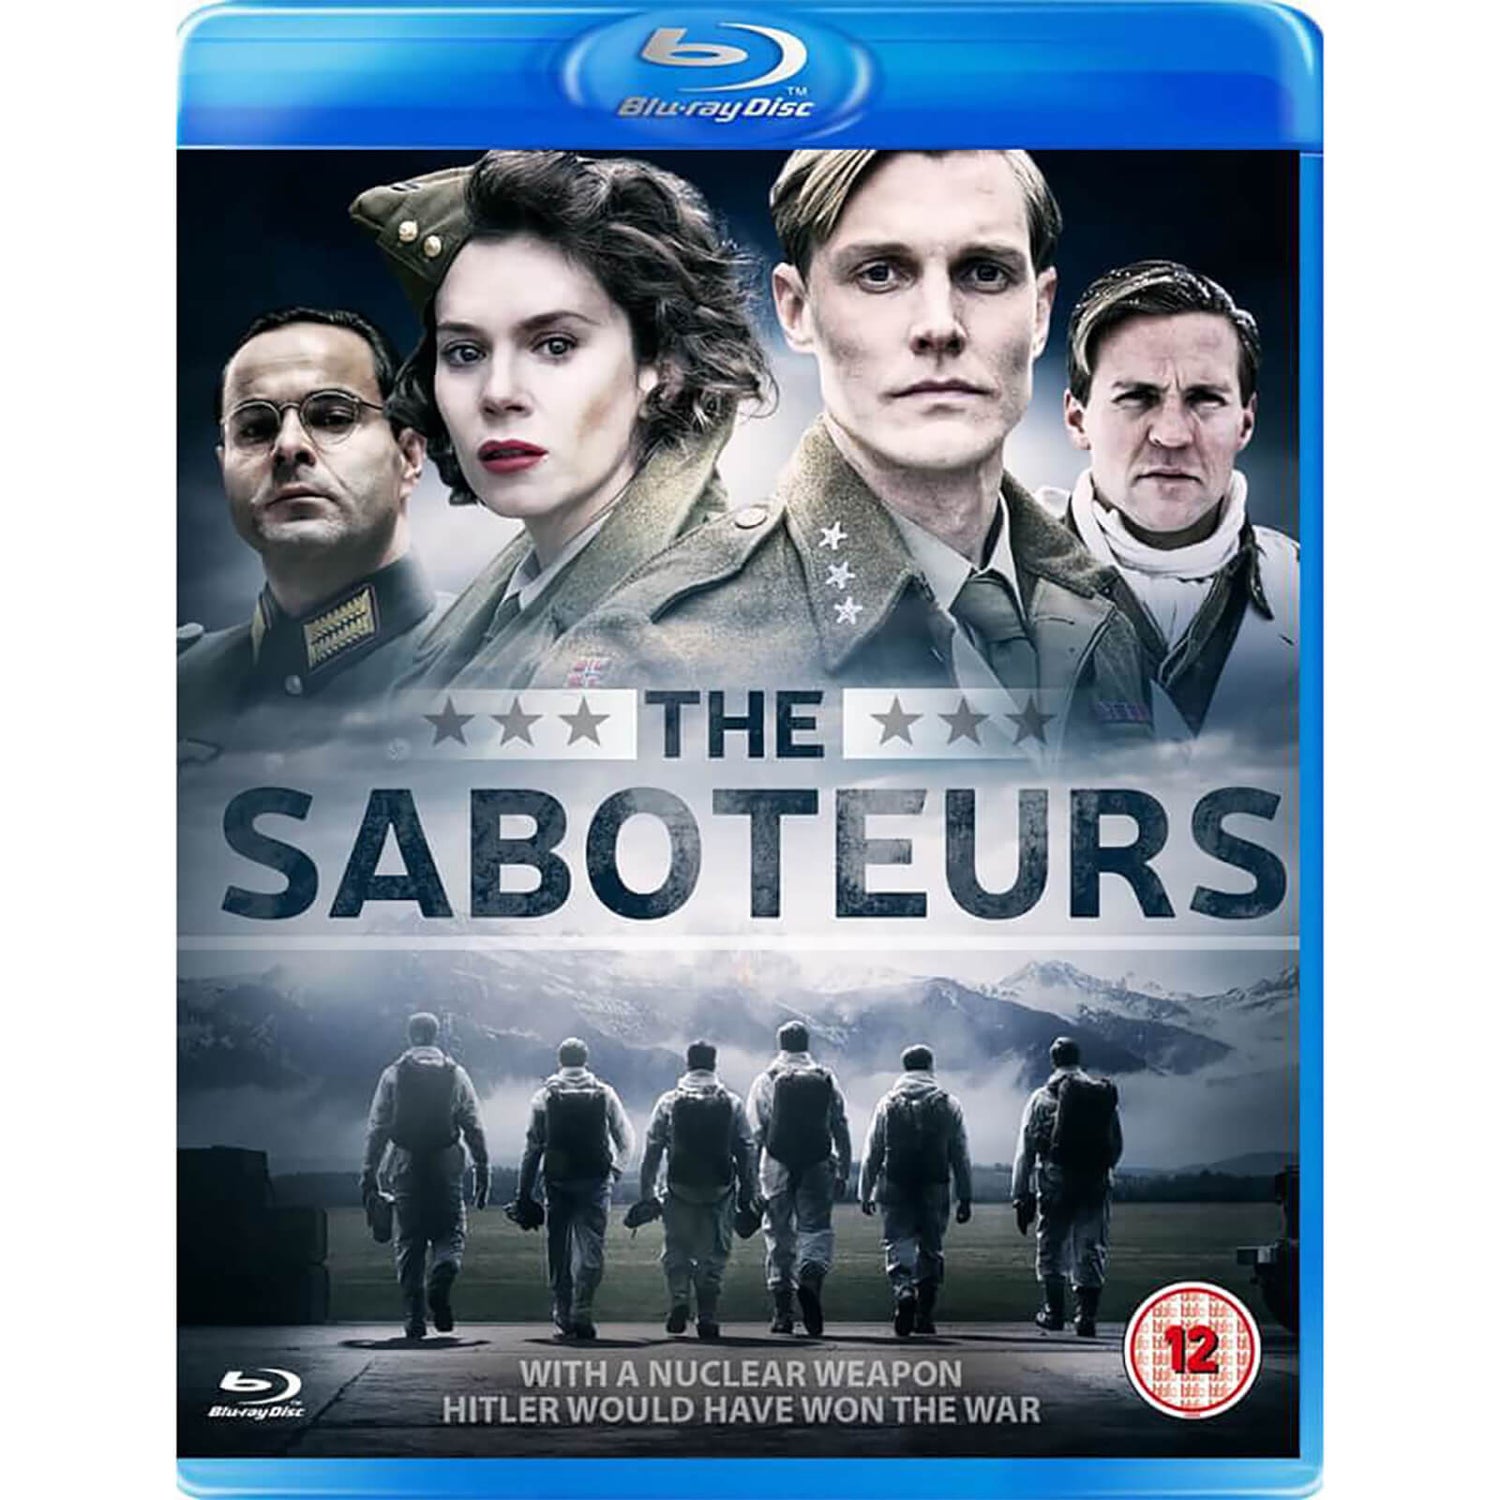 The Saboteurs Blu-ray